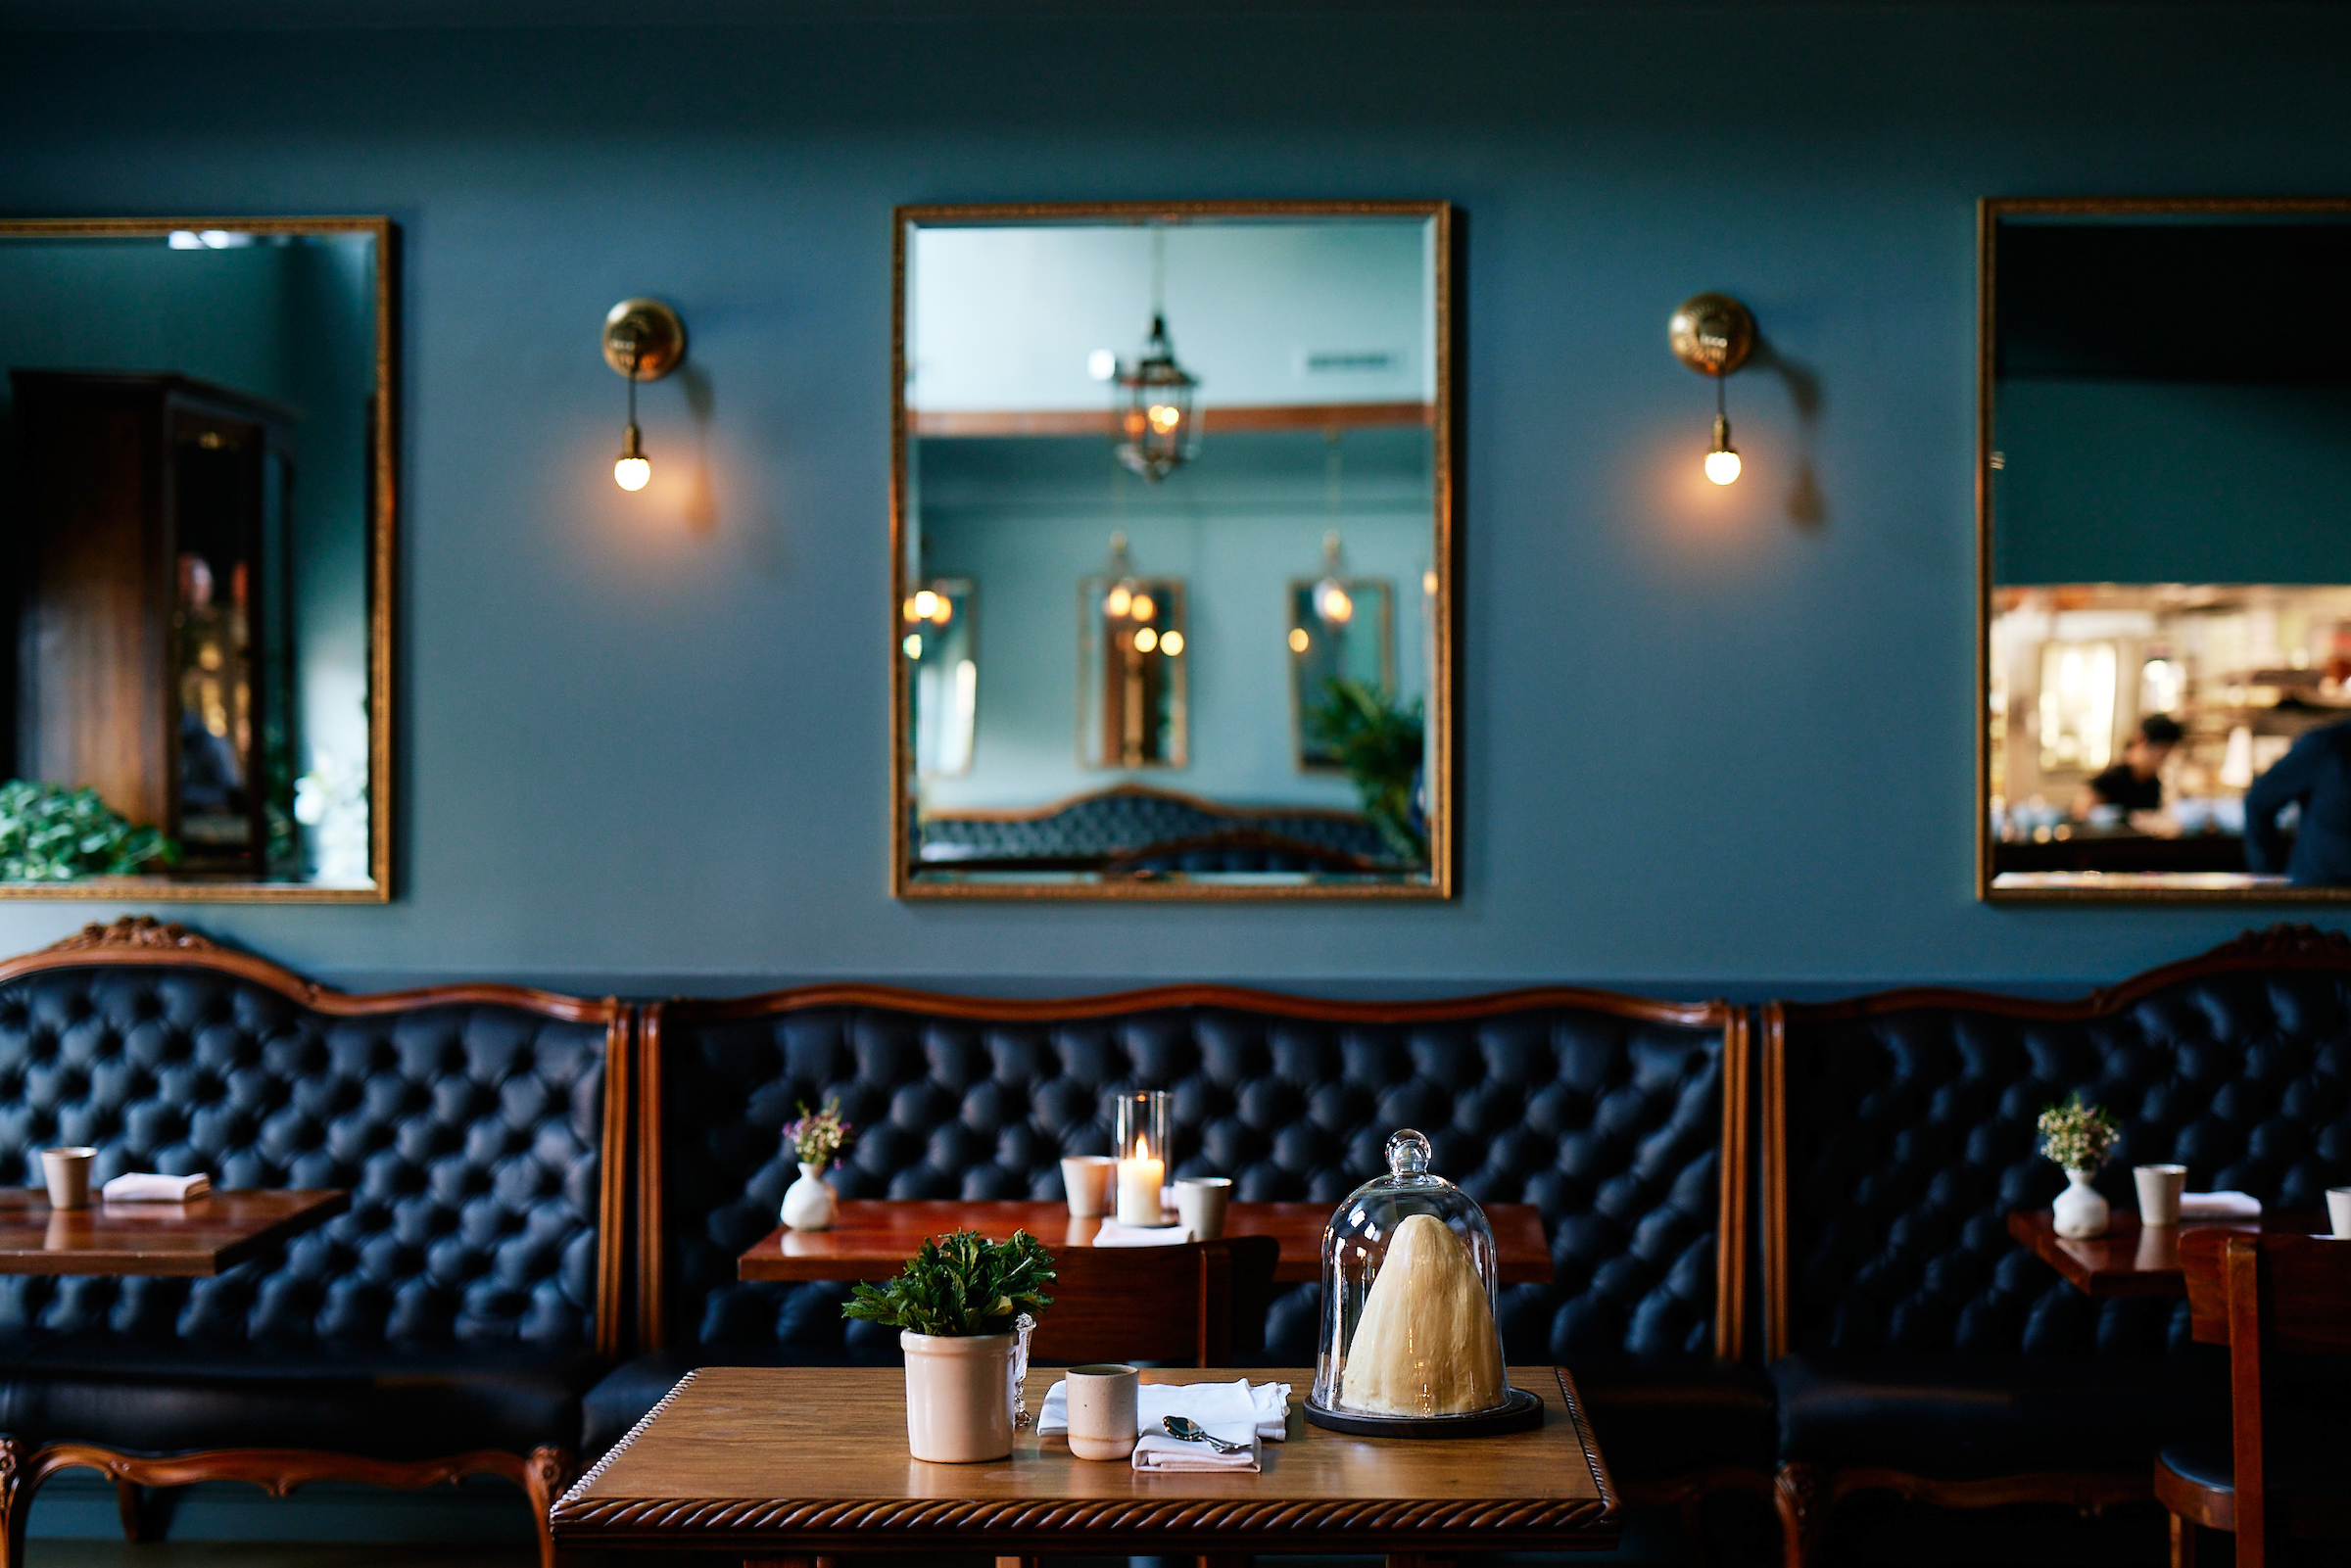 shot of wooden tables and tufted navy blue leather banquettes in the manzke dining room, which is painted in a medium blue-green hue